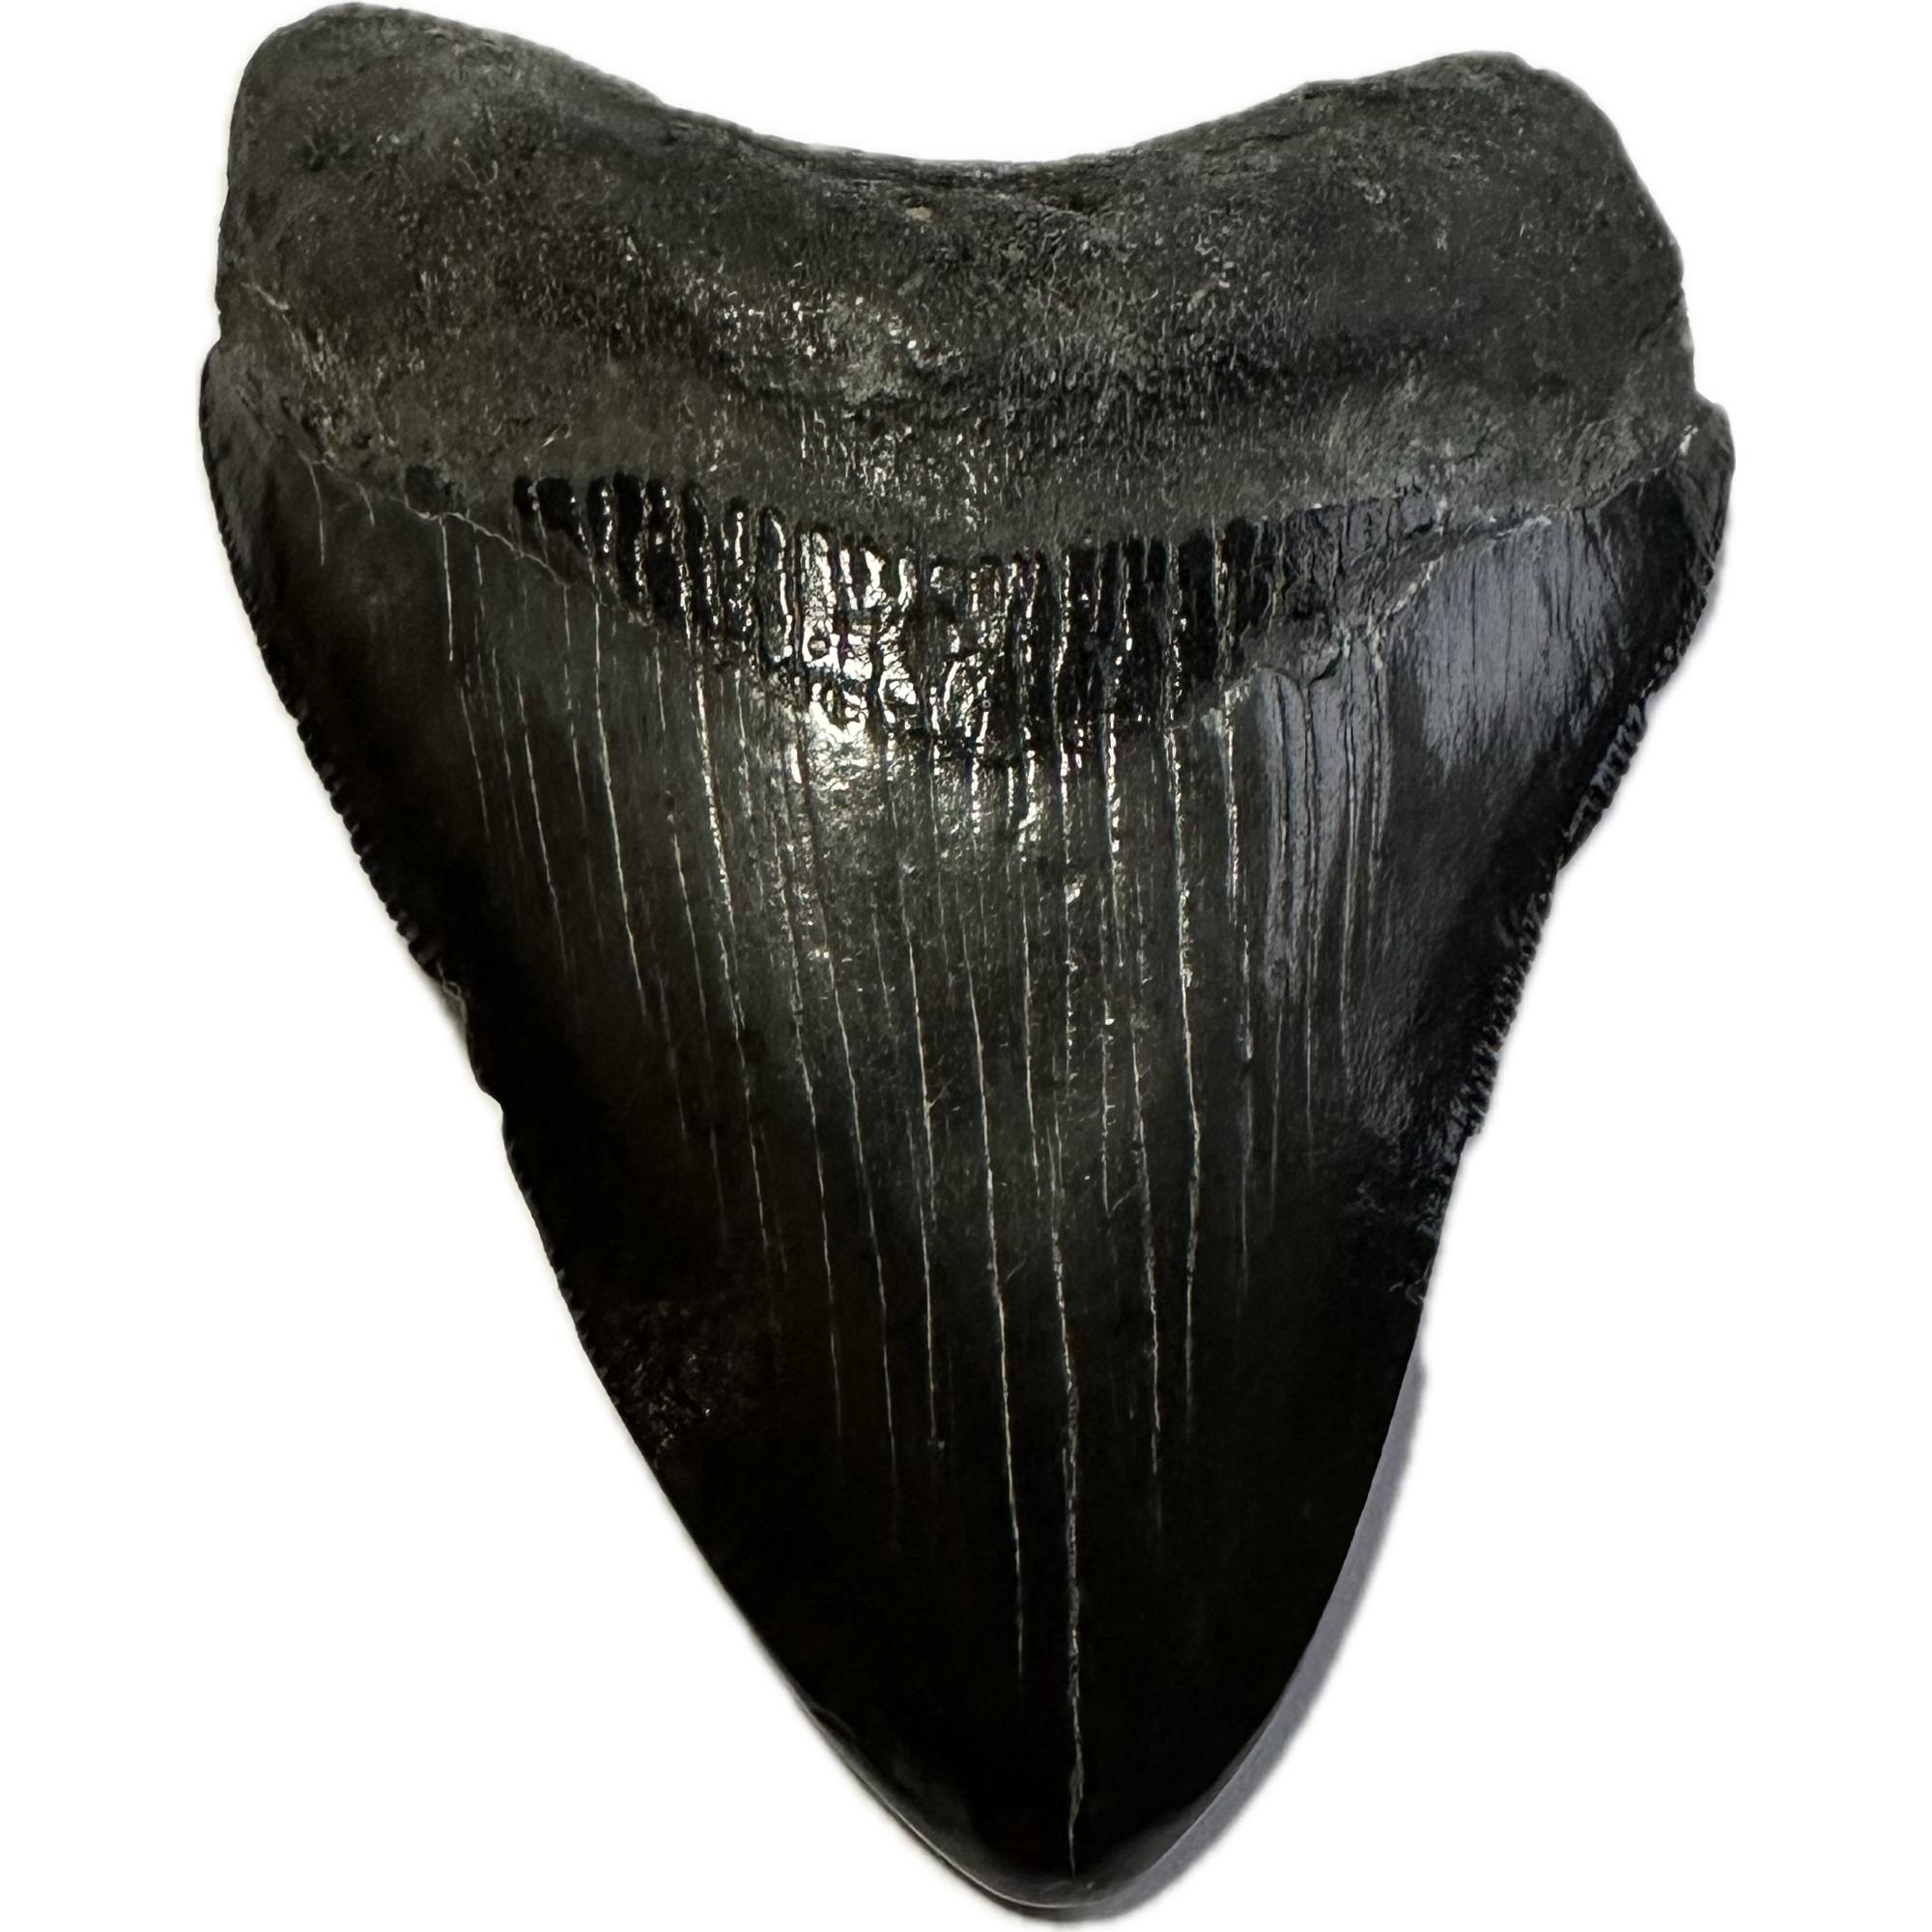 Megalodon tooth, 3.30 inches, this black beauty was found in South Carolina and has fantastic serrations